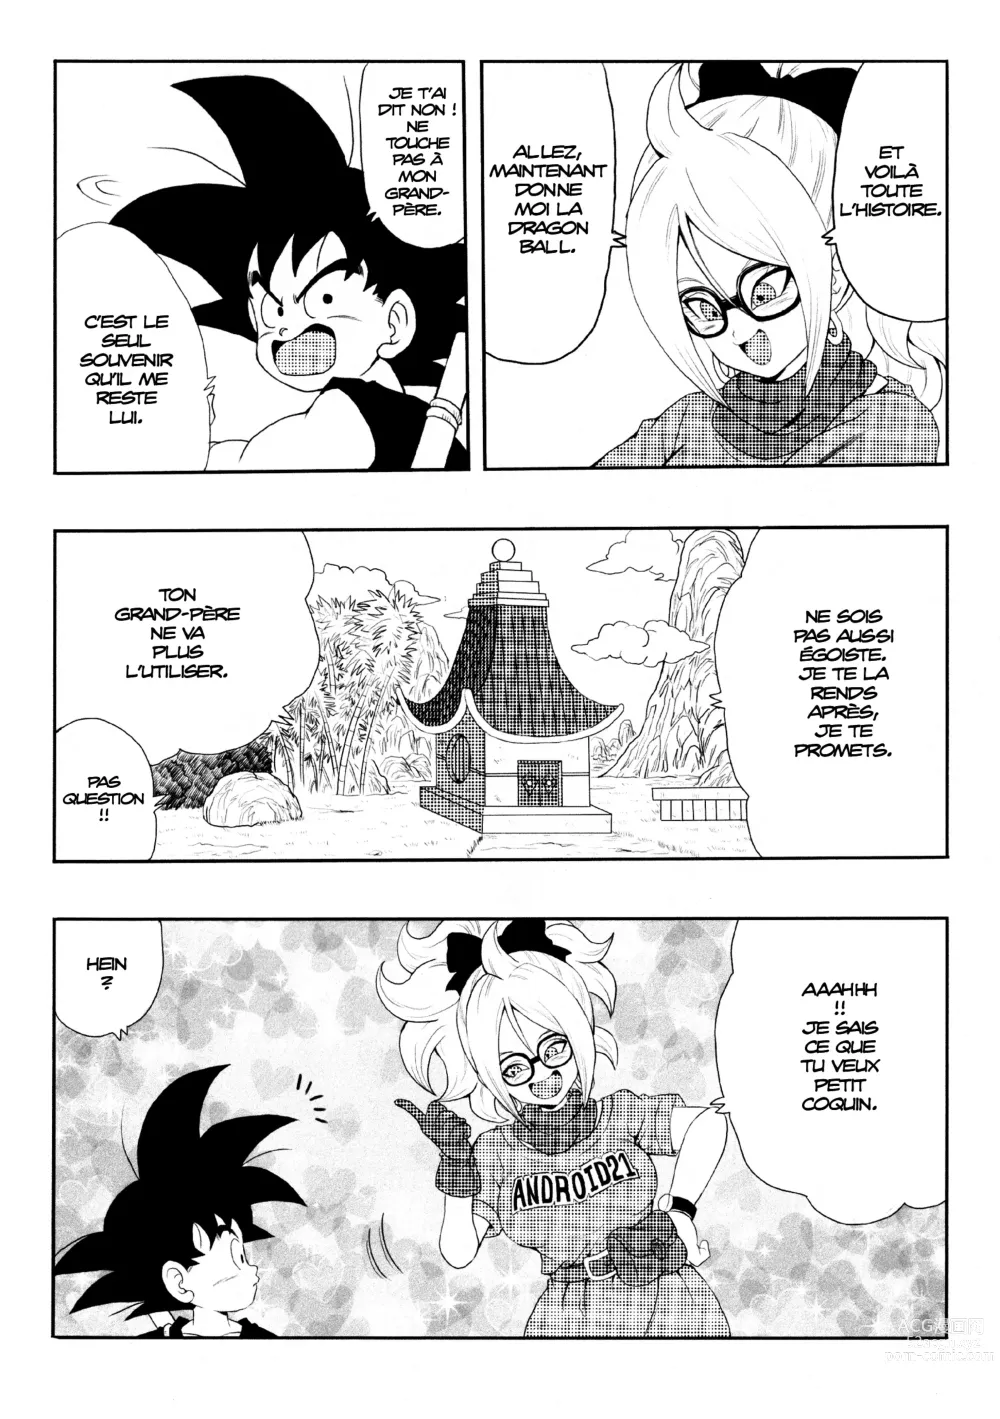 Page 4 of doujinshi Episode of Bulma - Android 21 Version